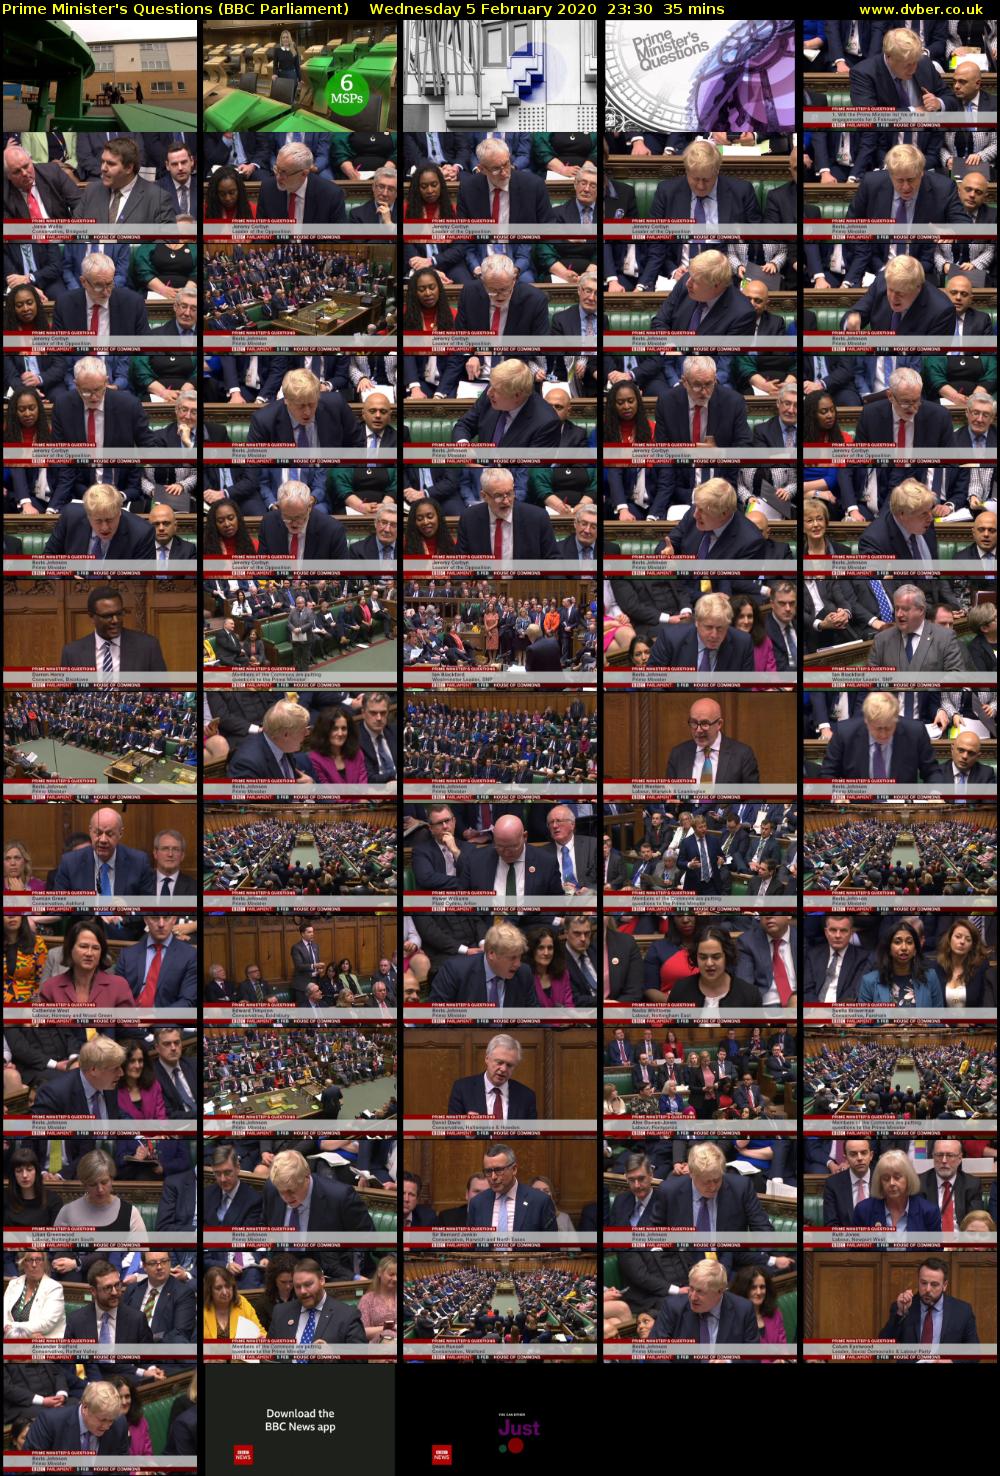 Prime Minister's Questions (BBC Parliament) Wednesday 5 February 2020 23:30 - 00:05